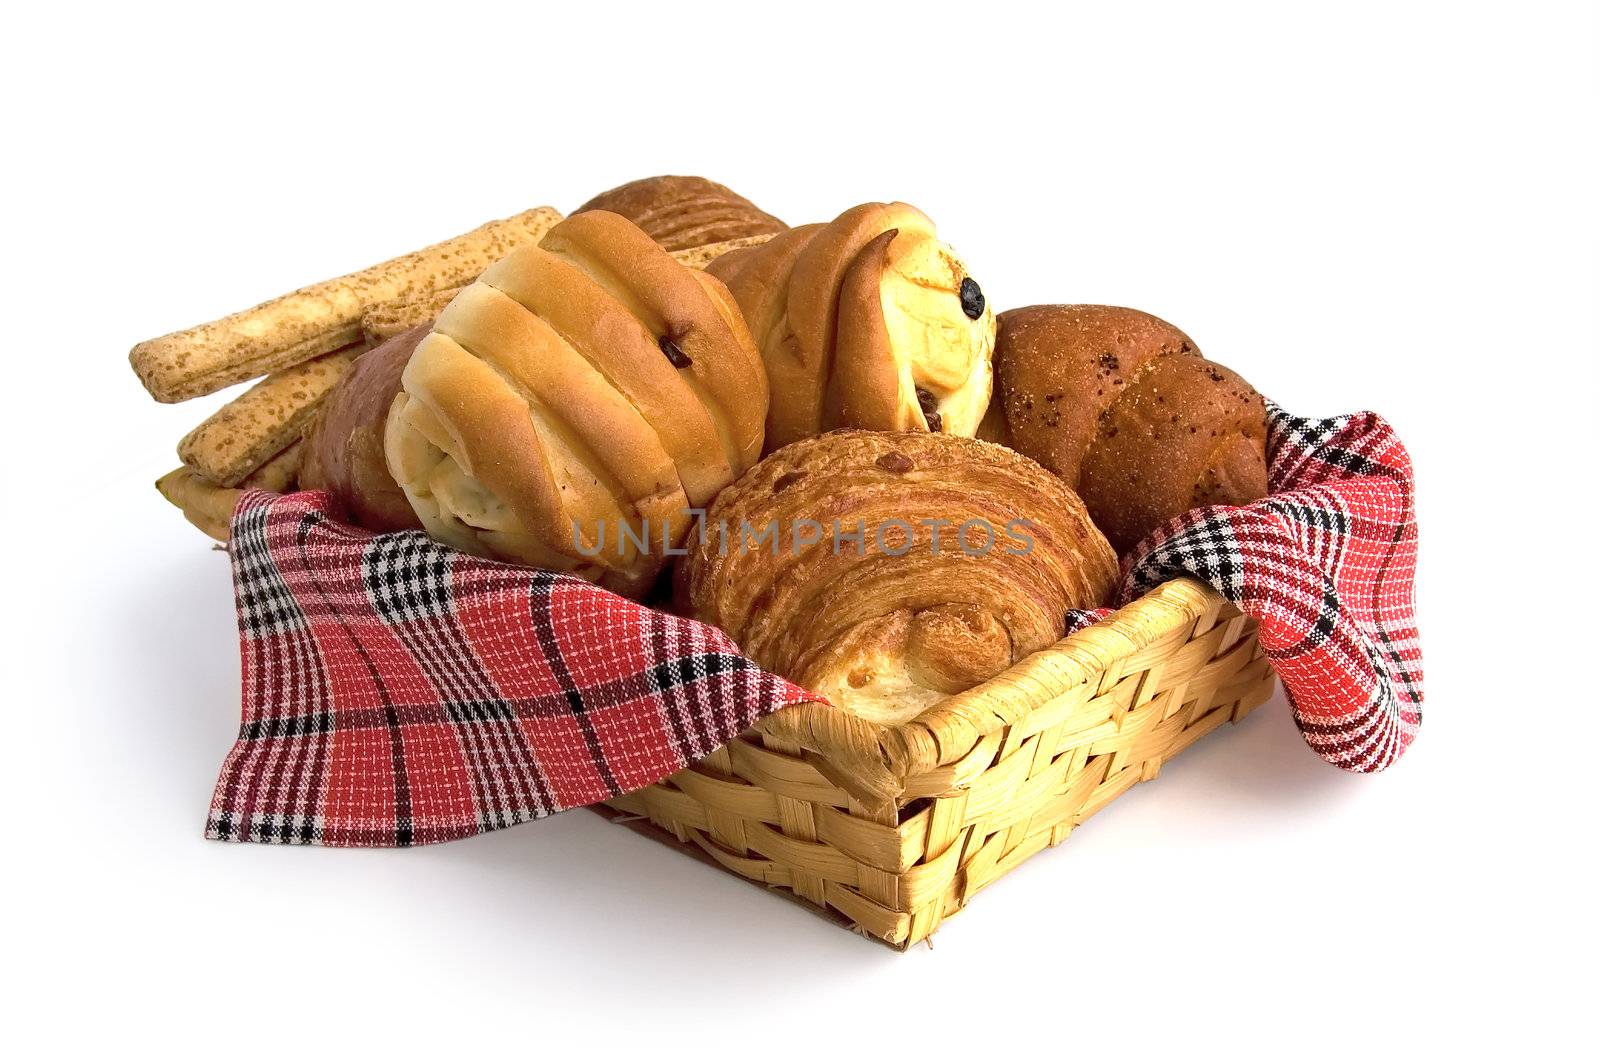 Rolls, croissants, bread sticks in a wicker basket on a red checkered napkin isolated on a white background